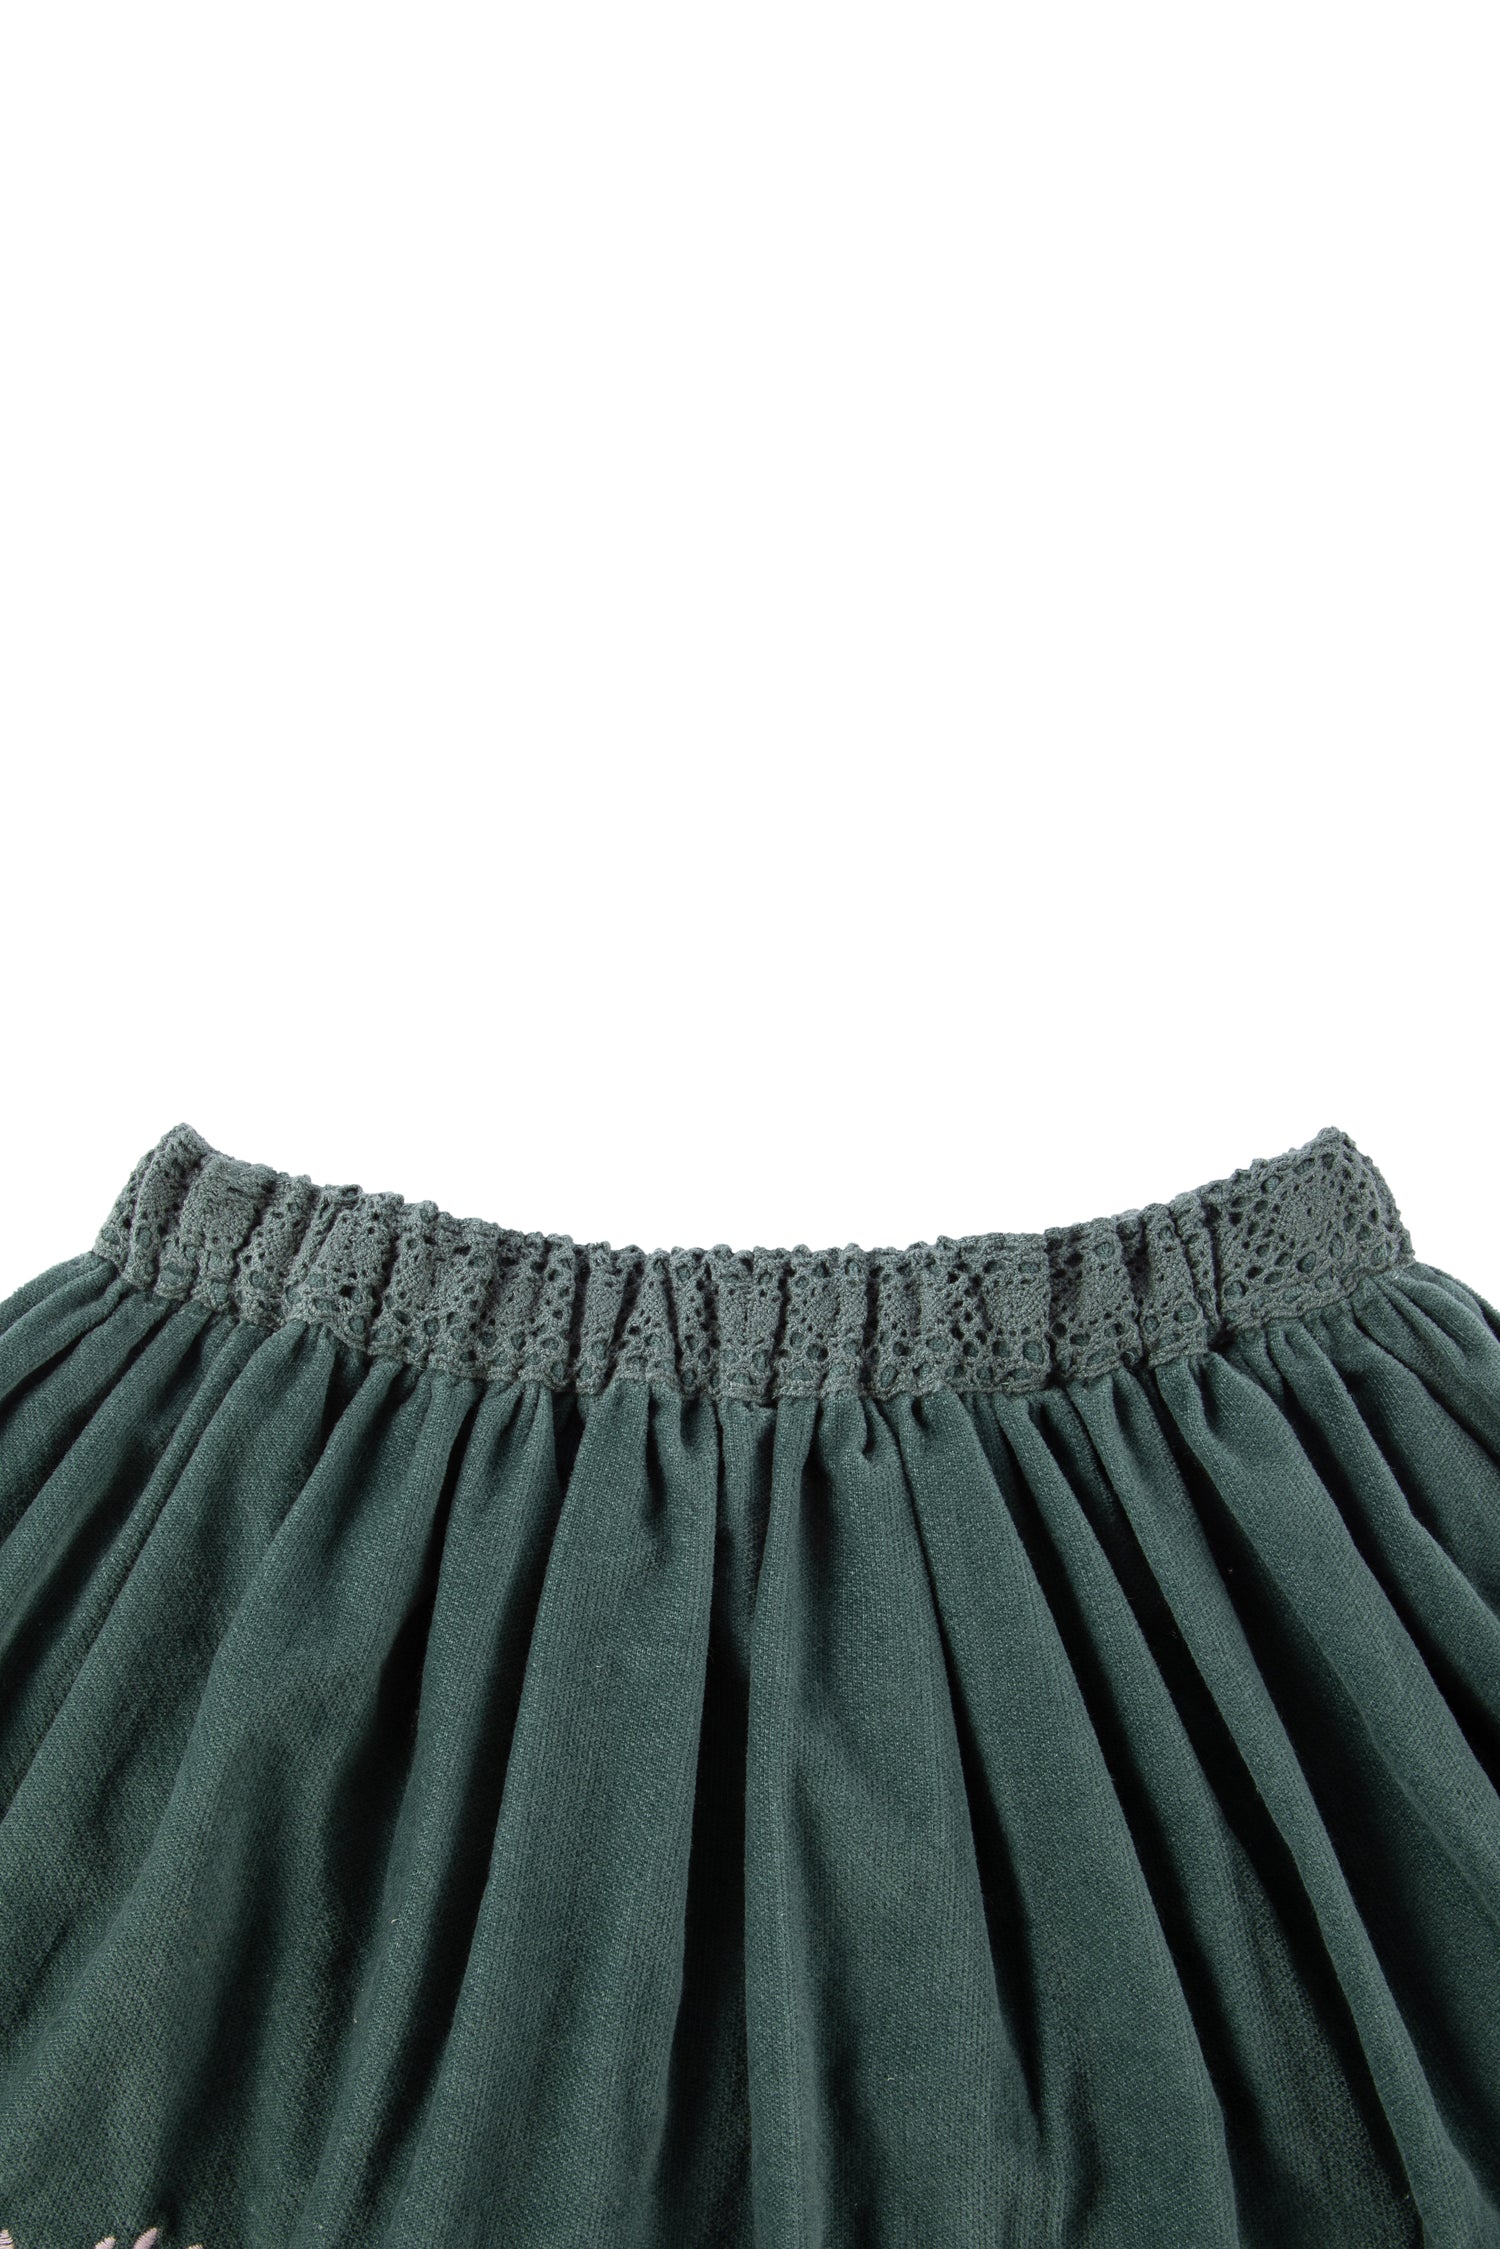 close up view of green velvet skirt with floral detail 